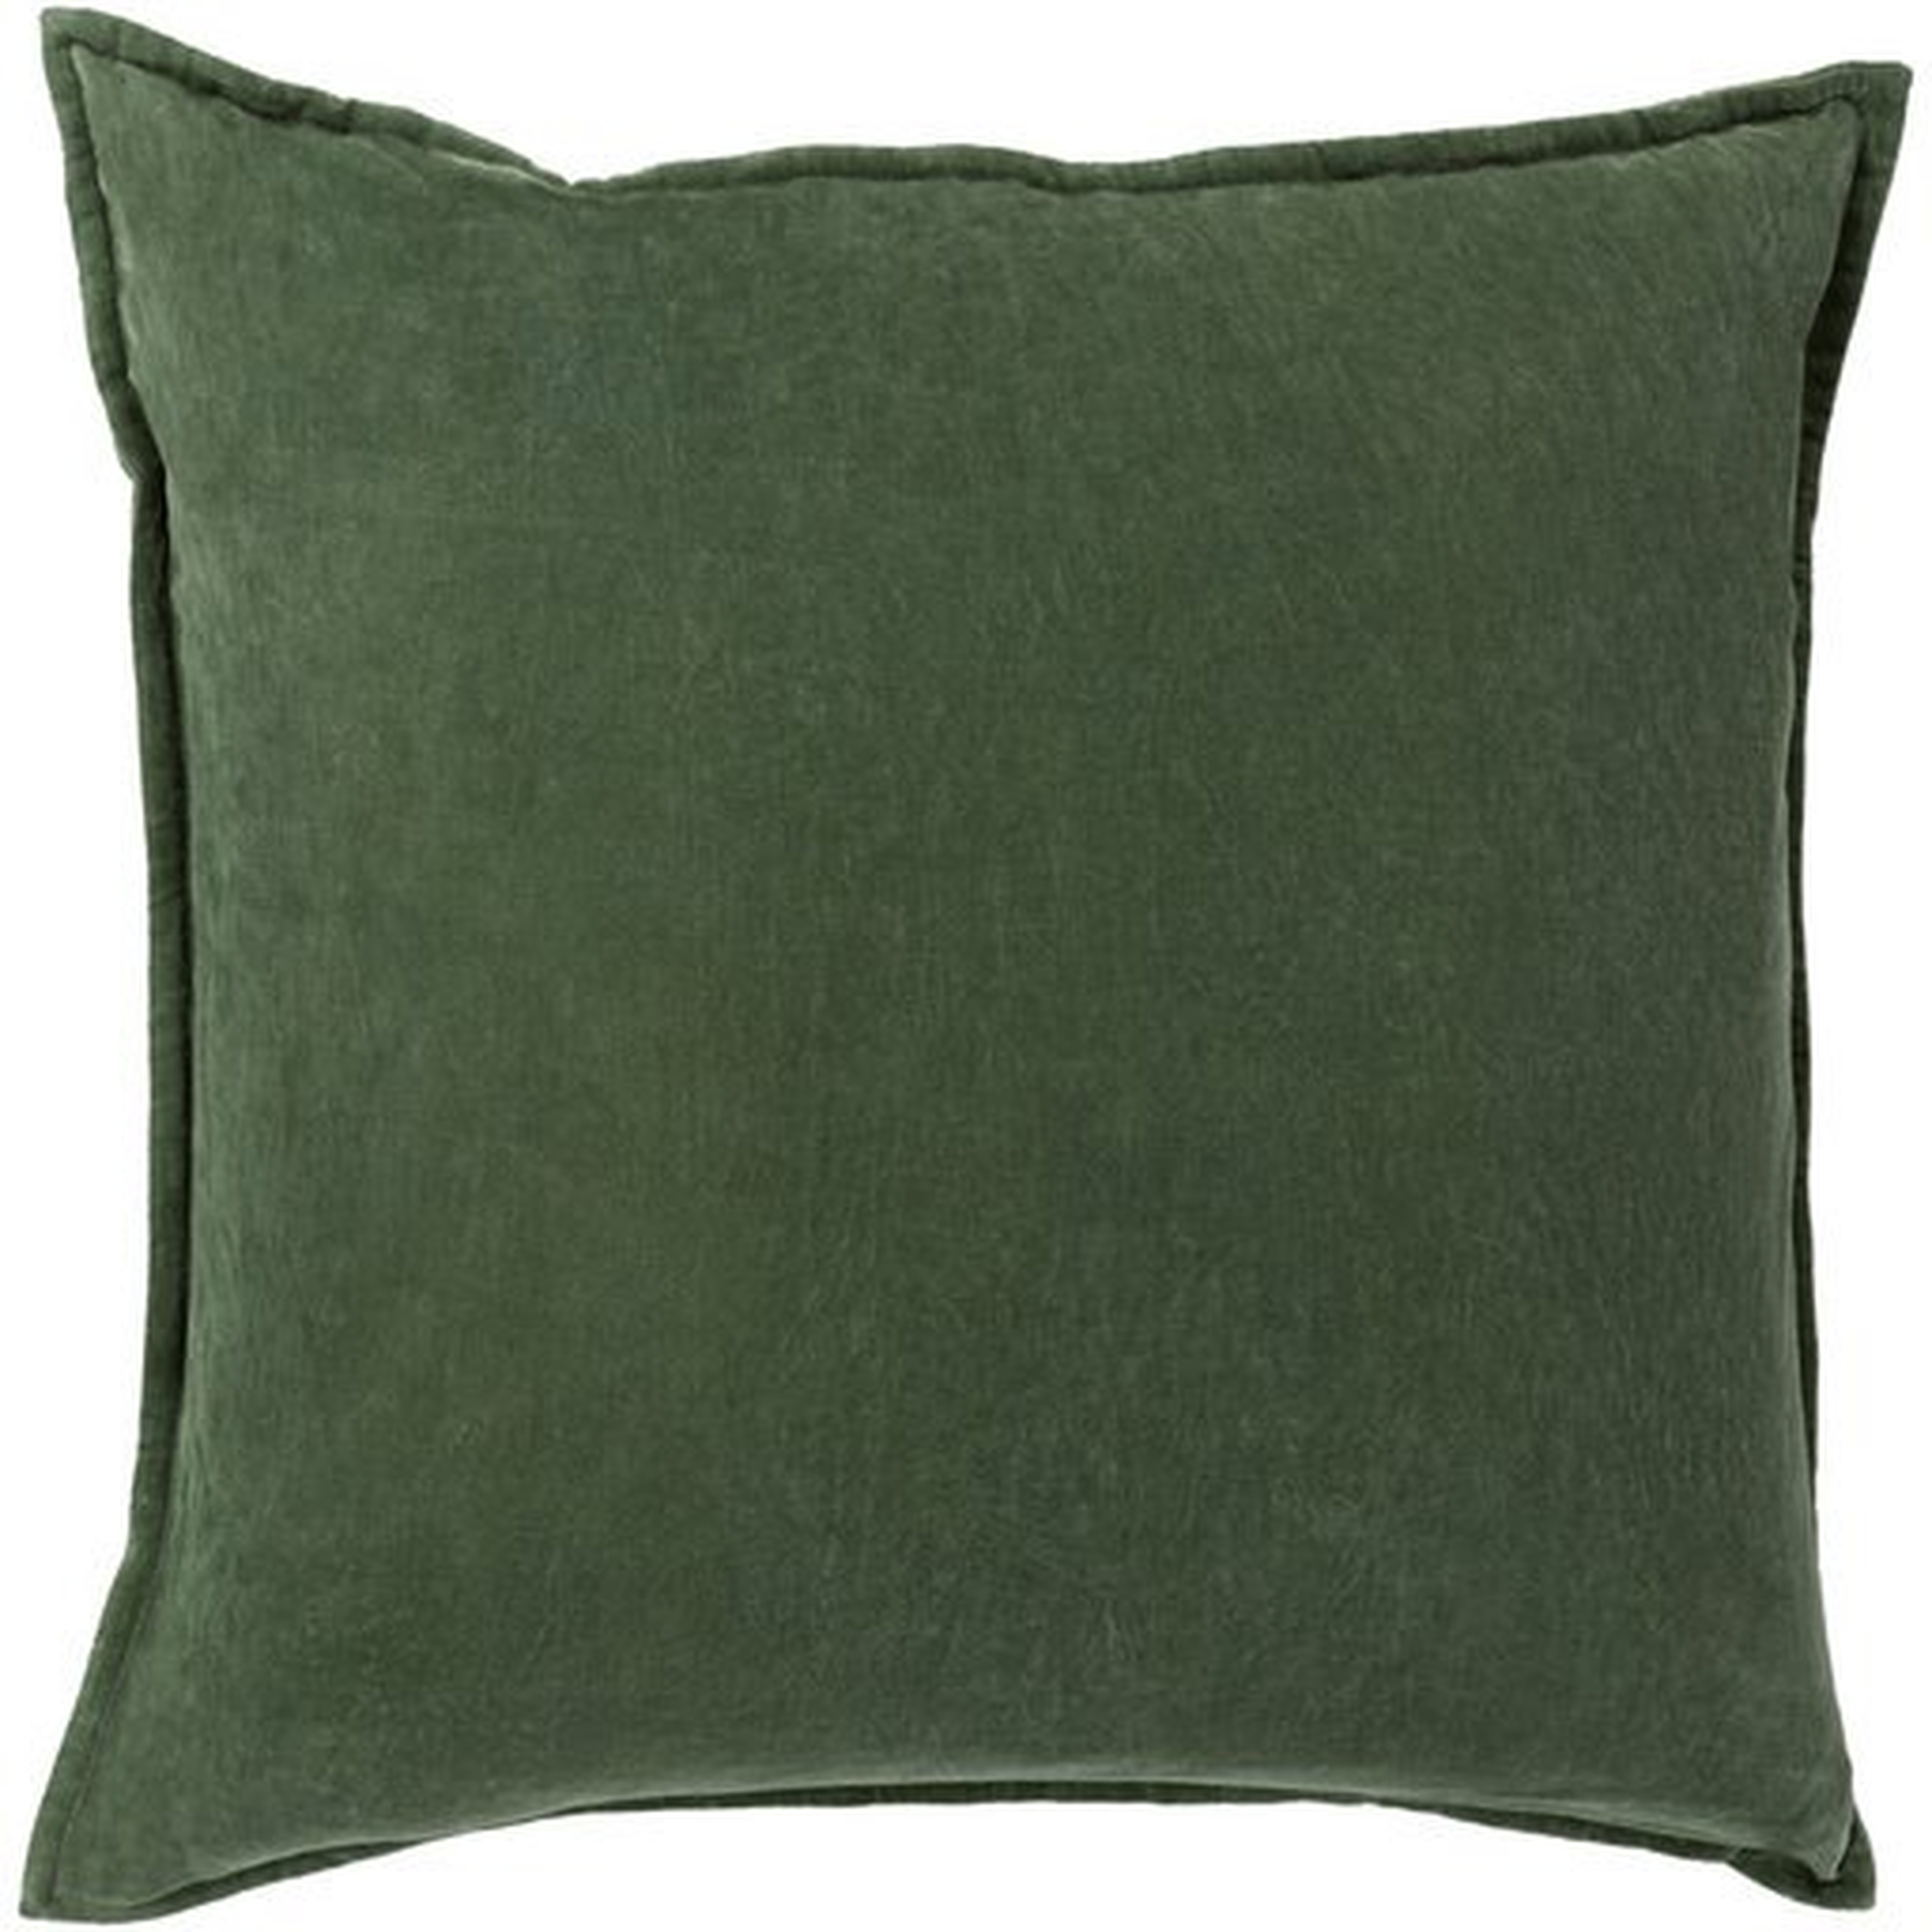 Cotton Velvet 20x20 Pillow Cover with Poly Insert - Surya